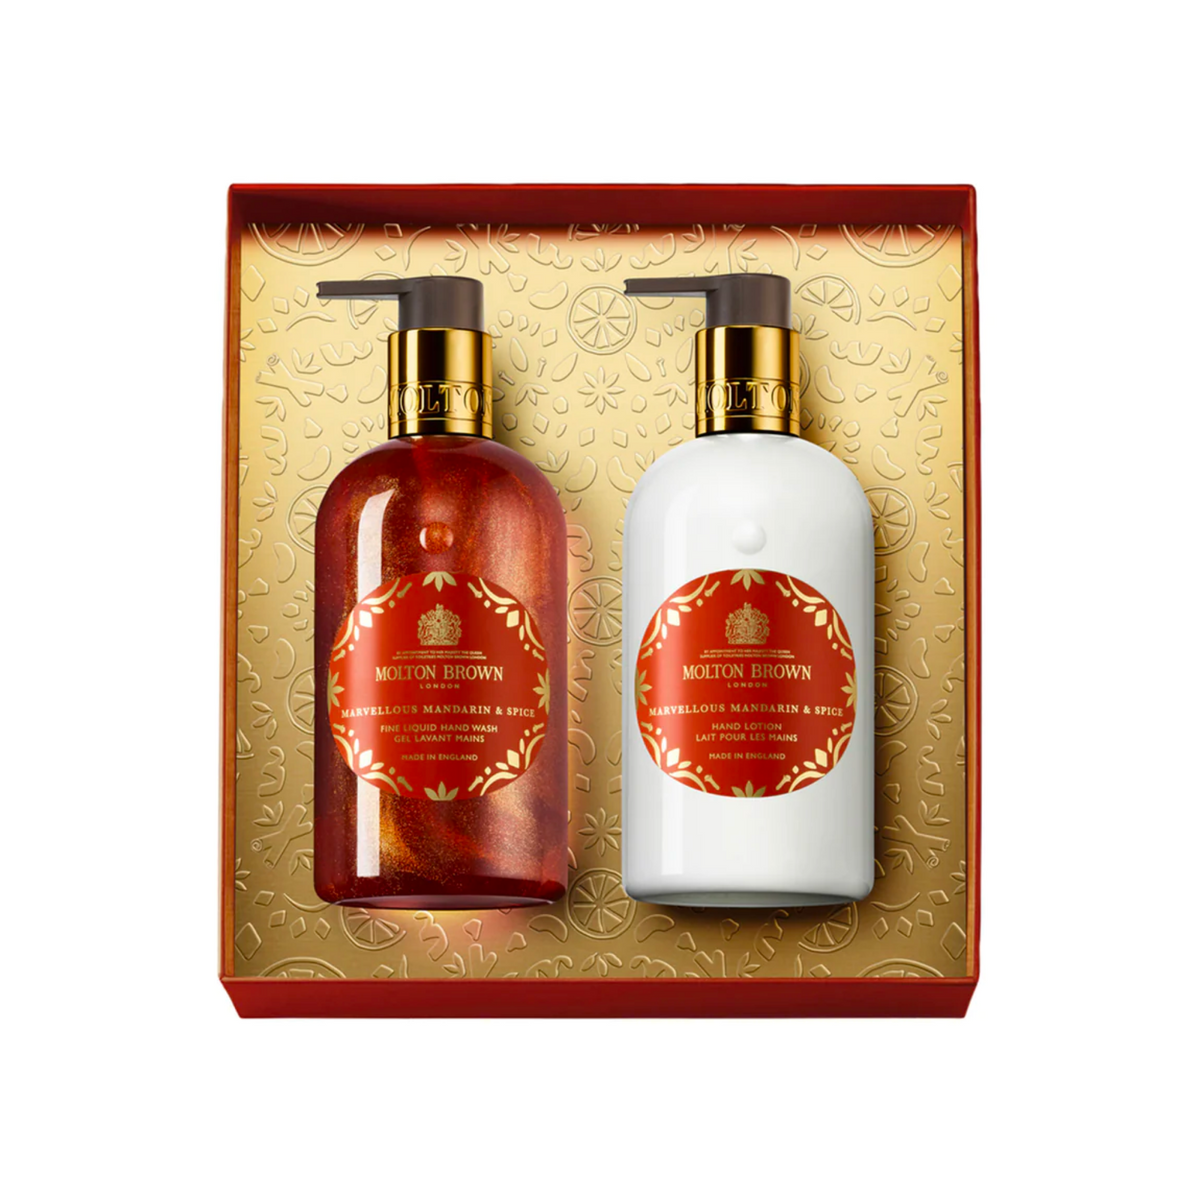 Primary Image of Marvellous Mandarin and Spice Hand Care Collection